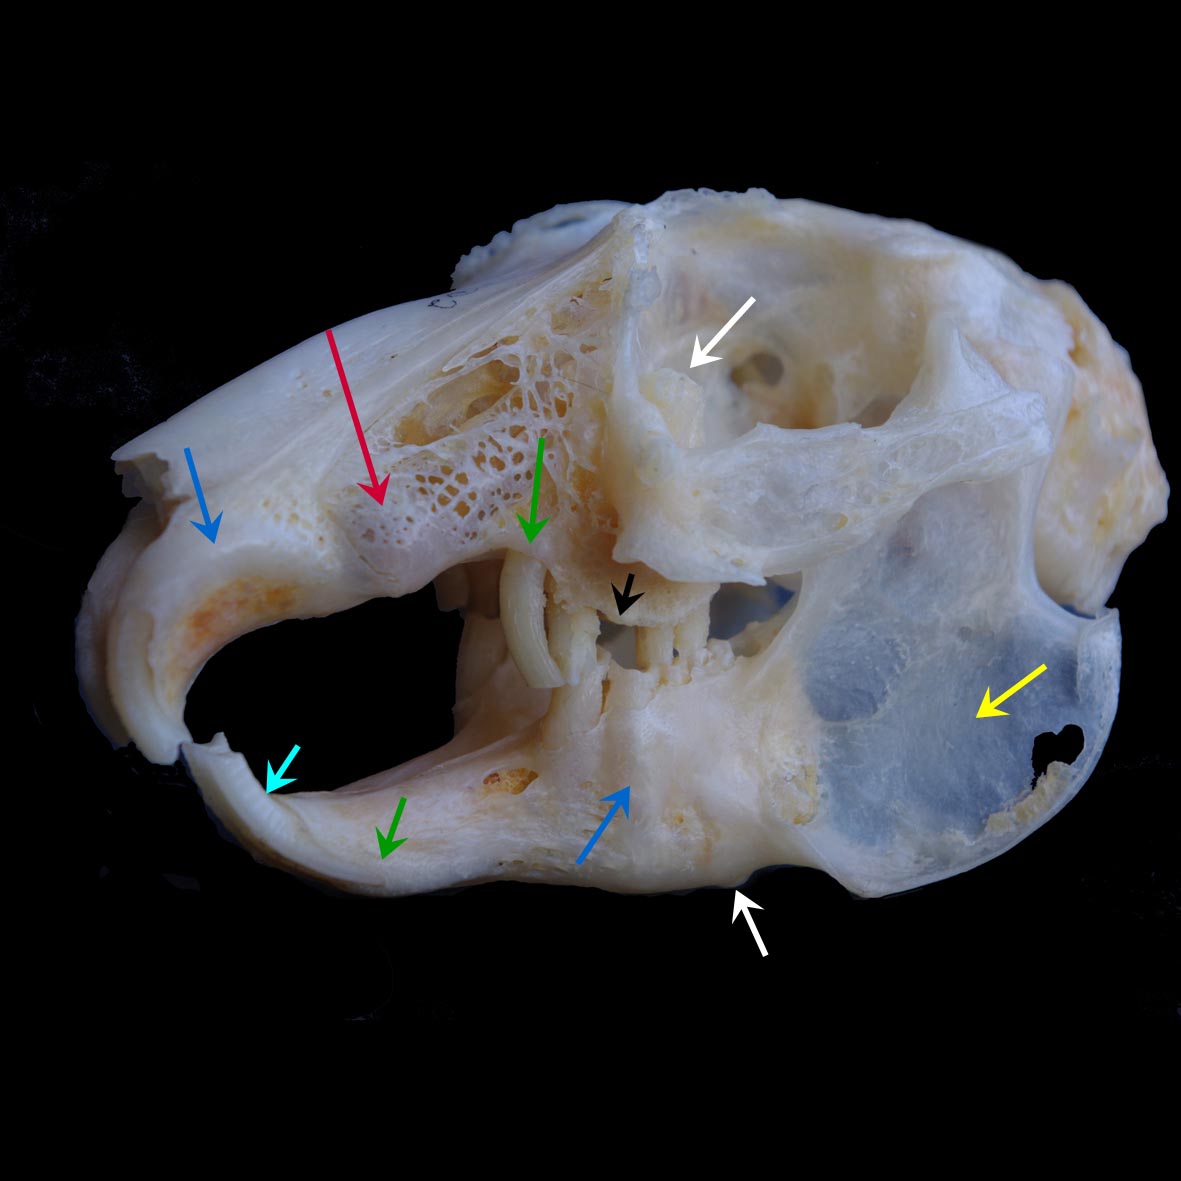 Annotated skull showing features of PSADD